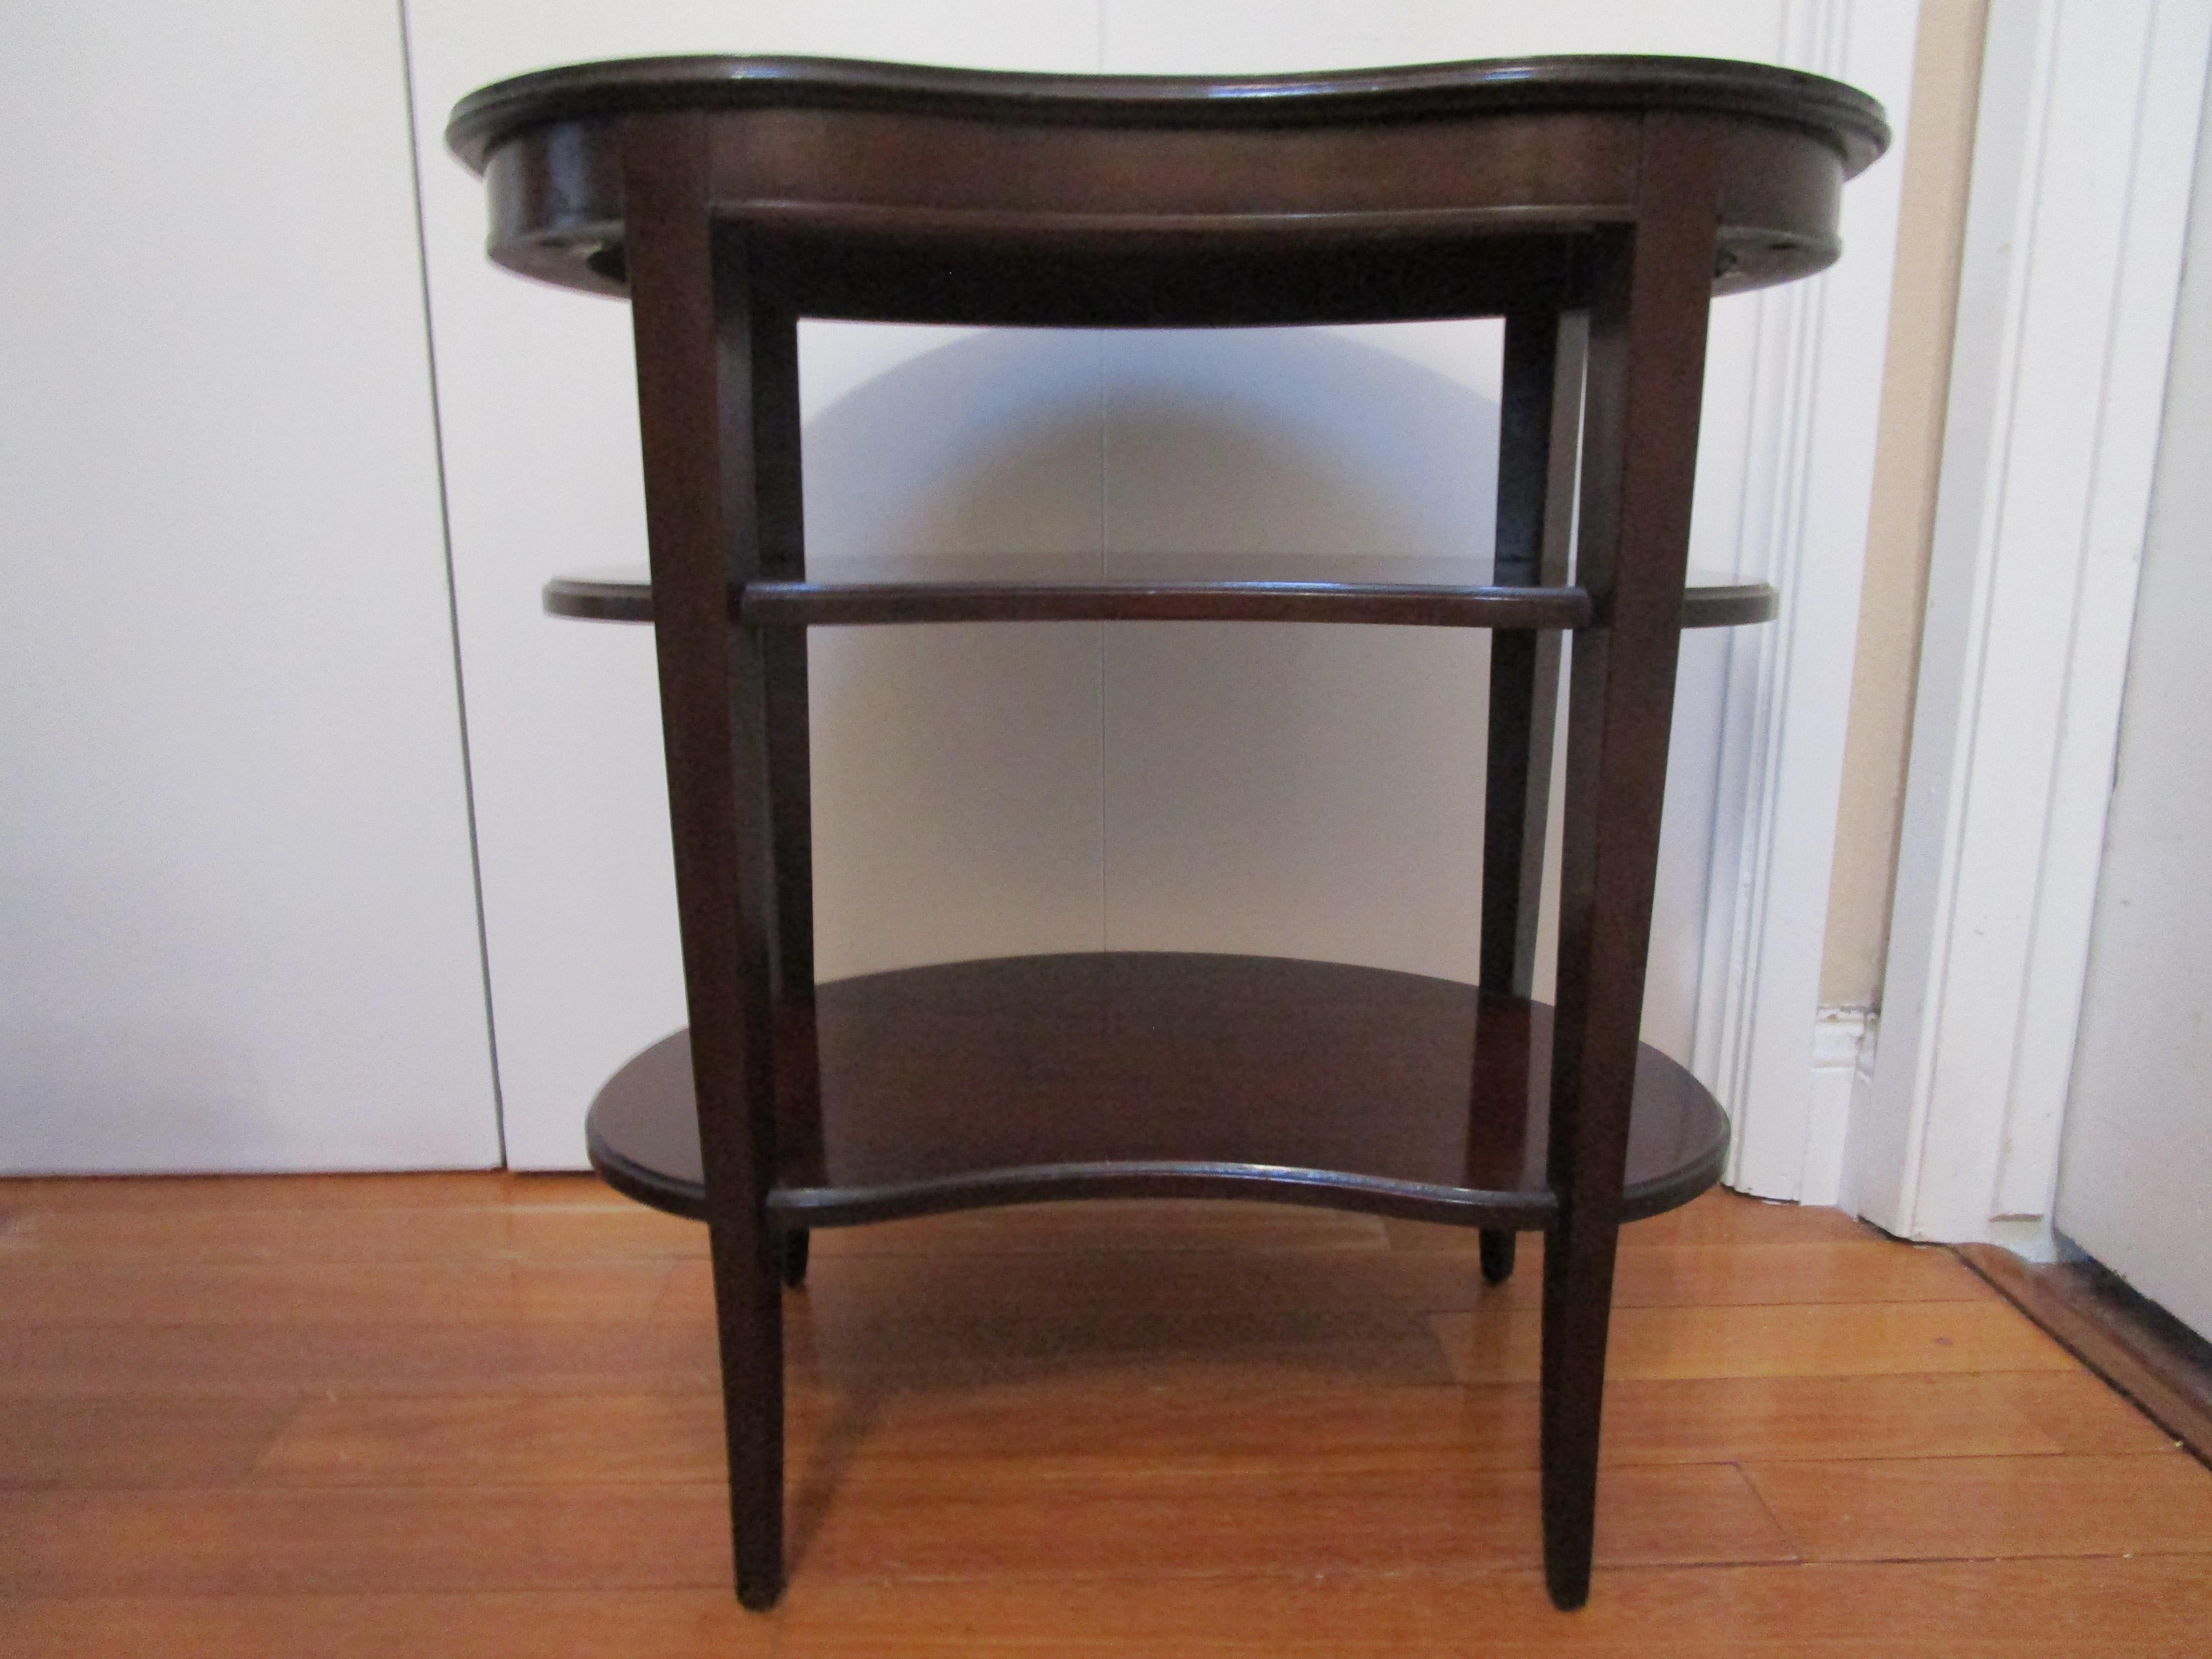 This side table is unique with its three tiers and kidney shape, echoing art deco style. This is a beautiful piece from Imperial Furniture of Grand Rapids. It is compact and functional. The Regency style mahogany kidney-form tiered side table is in